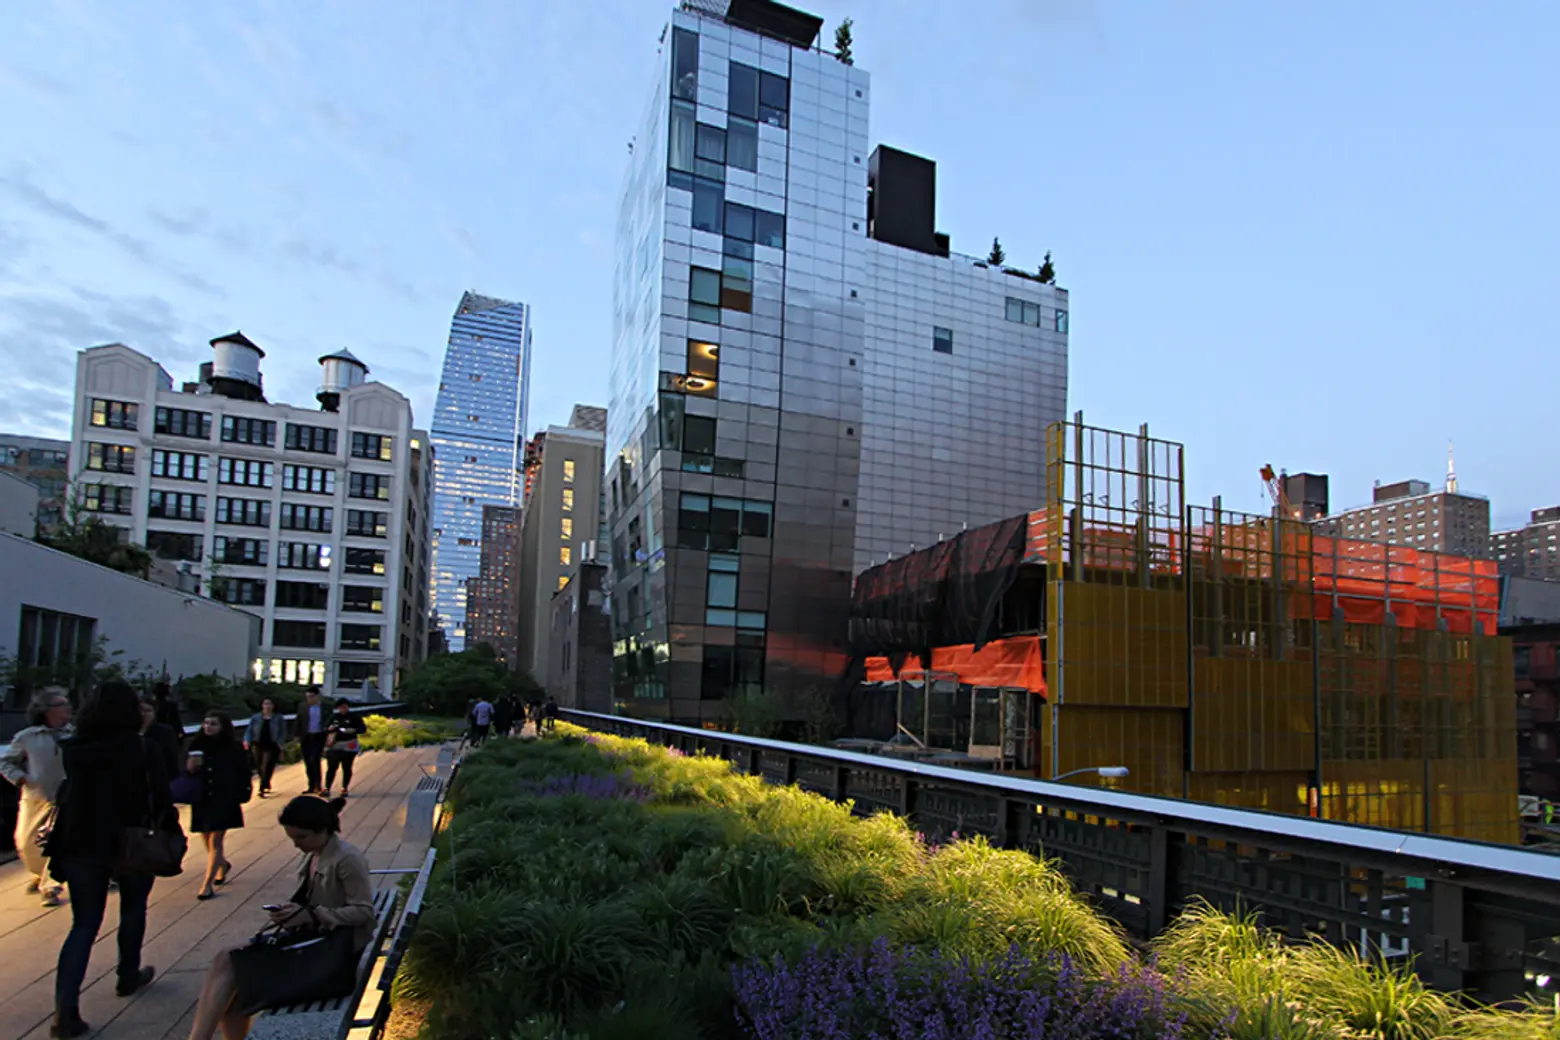 Shvo, Chelsea apartments, High Line COndos, NYC tower